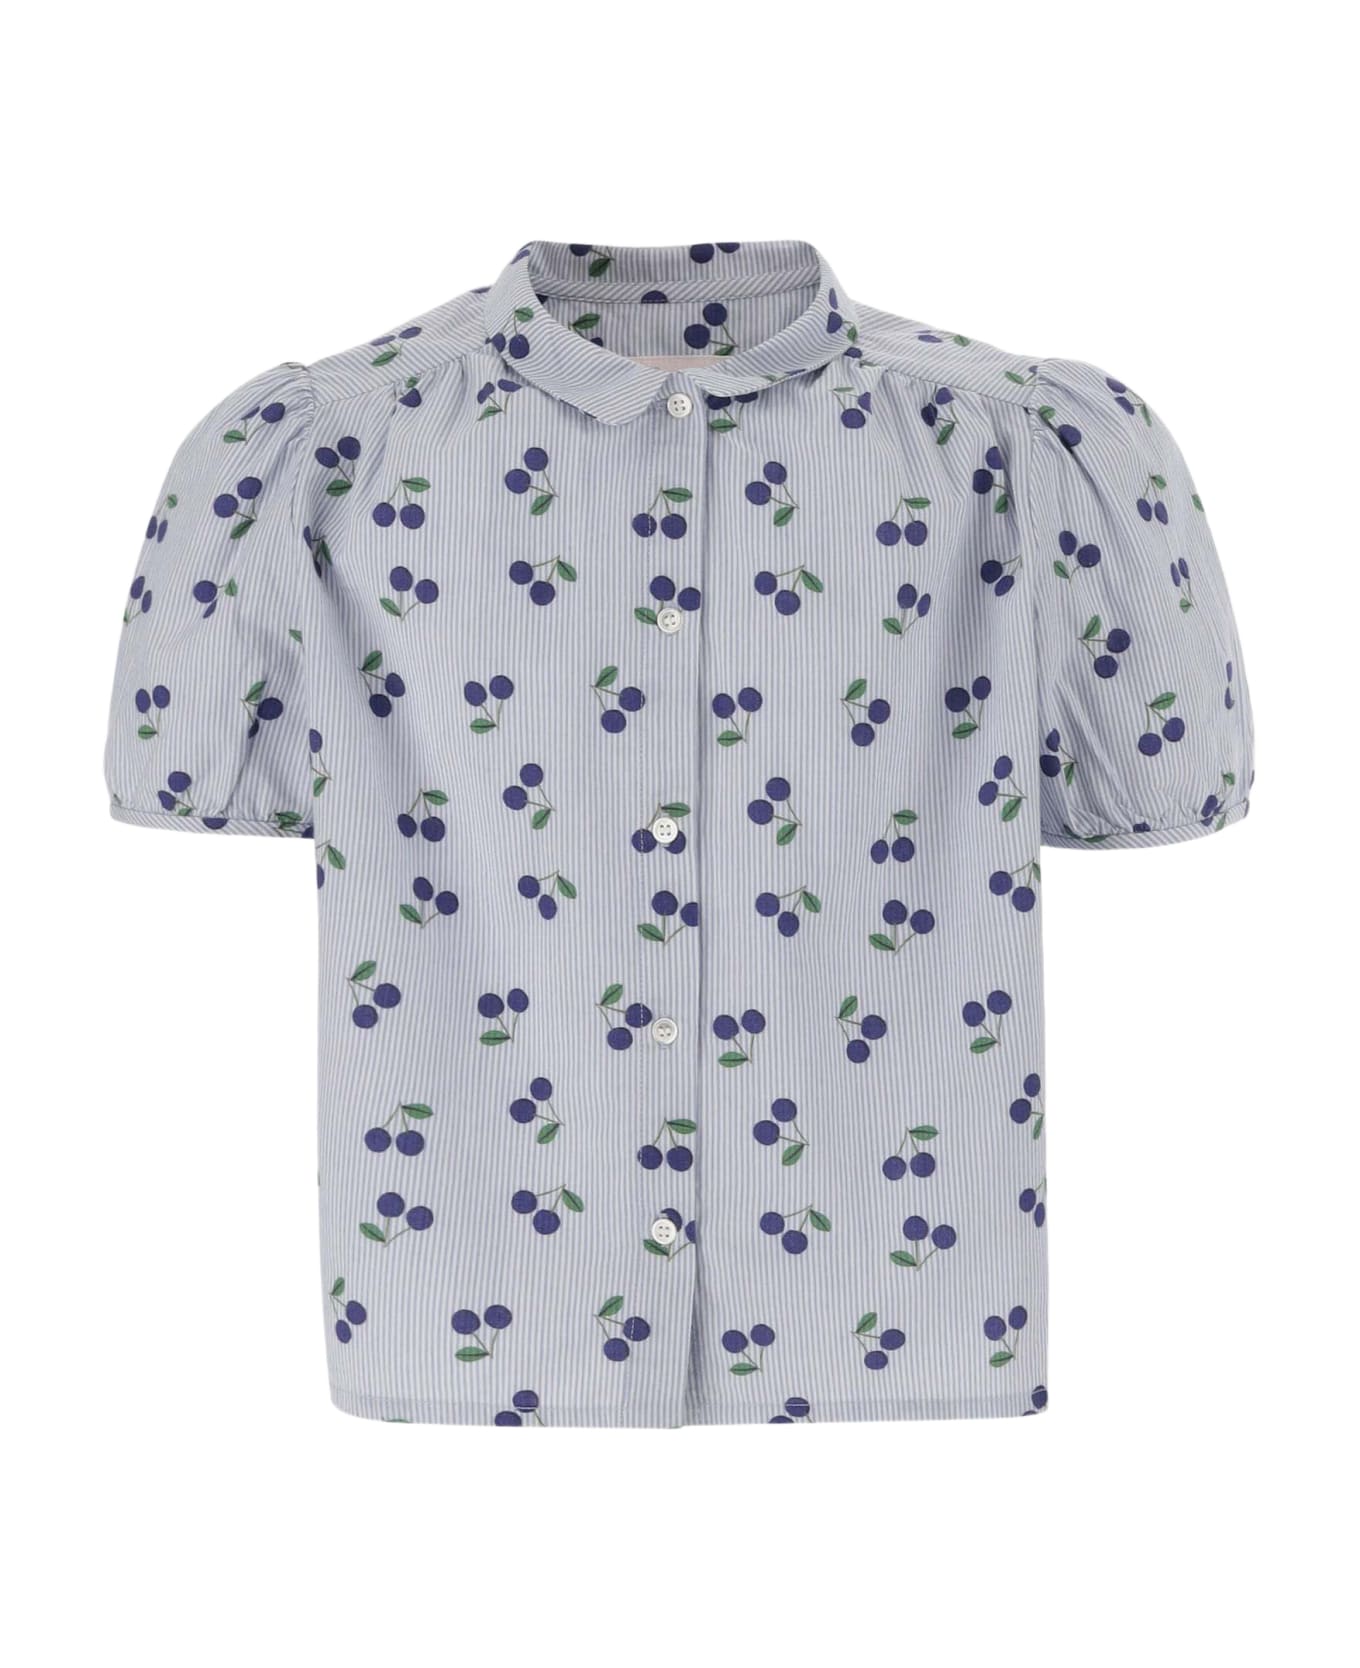 Bonpoint Cotton Shirt With Cherry Pattern - Cielo